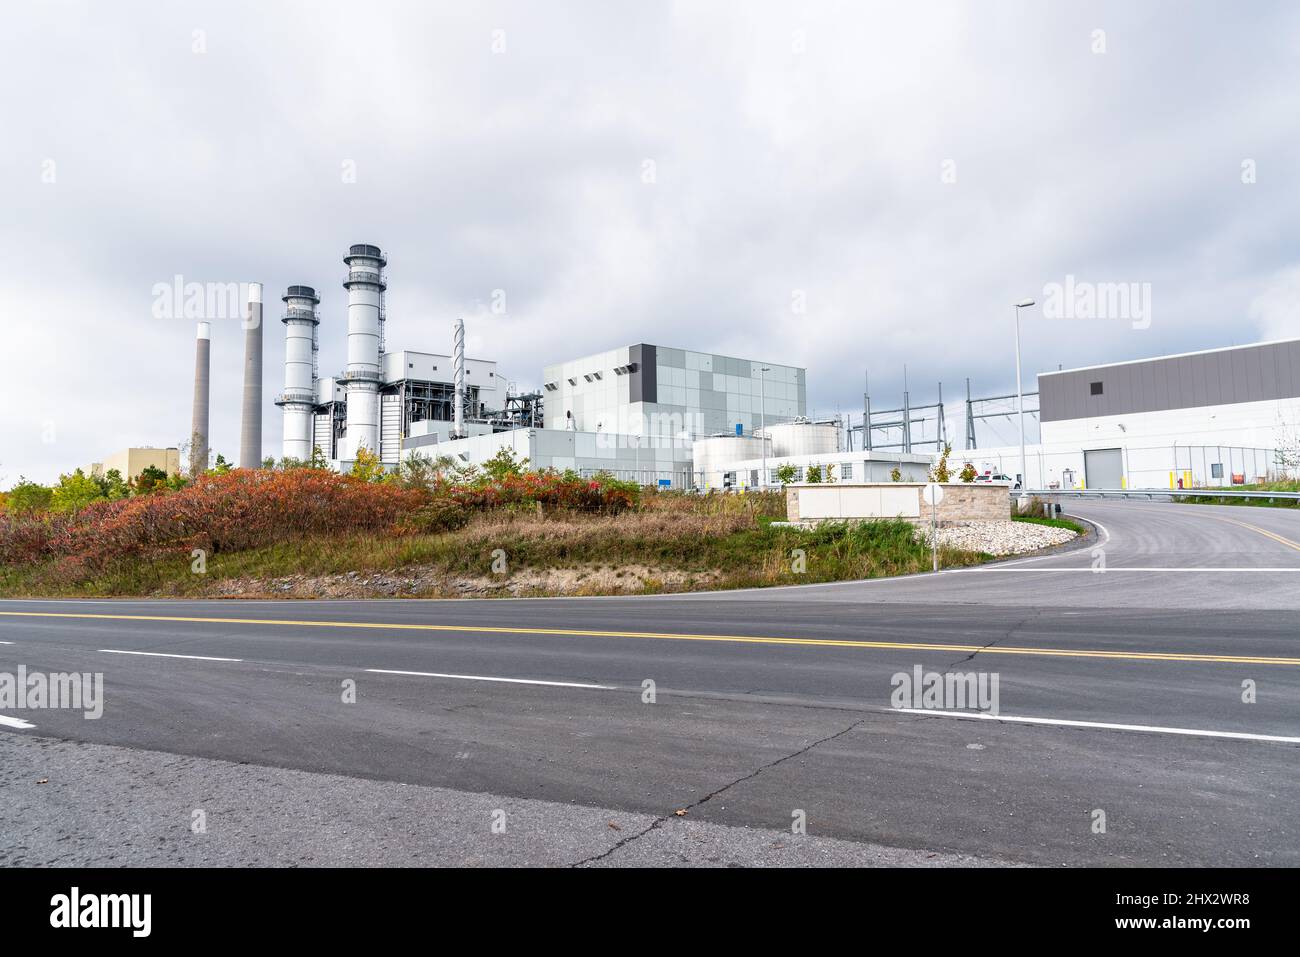 View of a gas-fired power plant on a cloudy autumn day Stock Photo